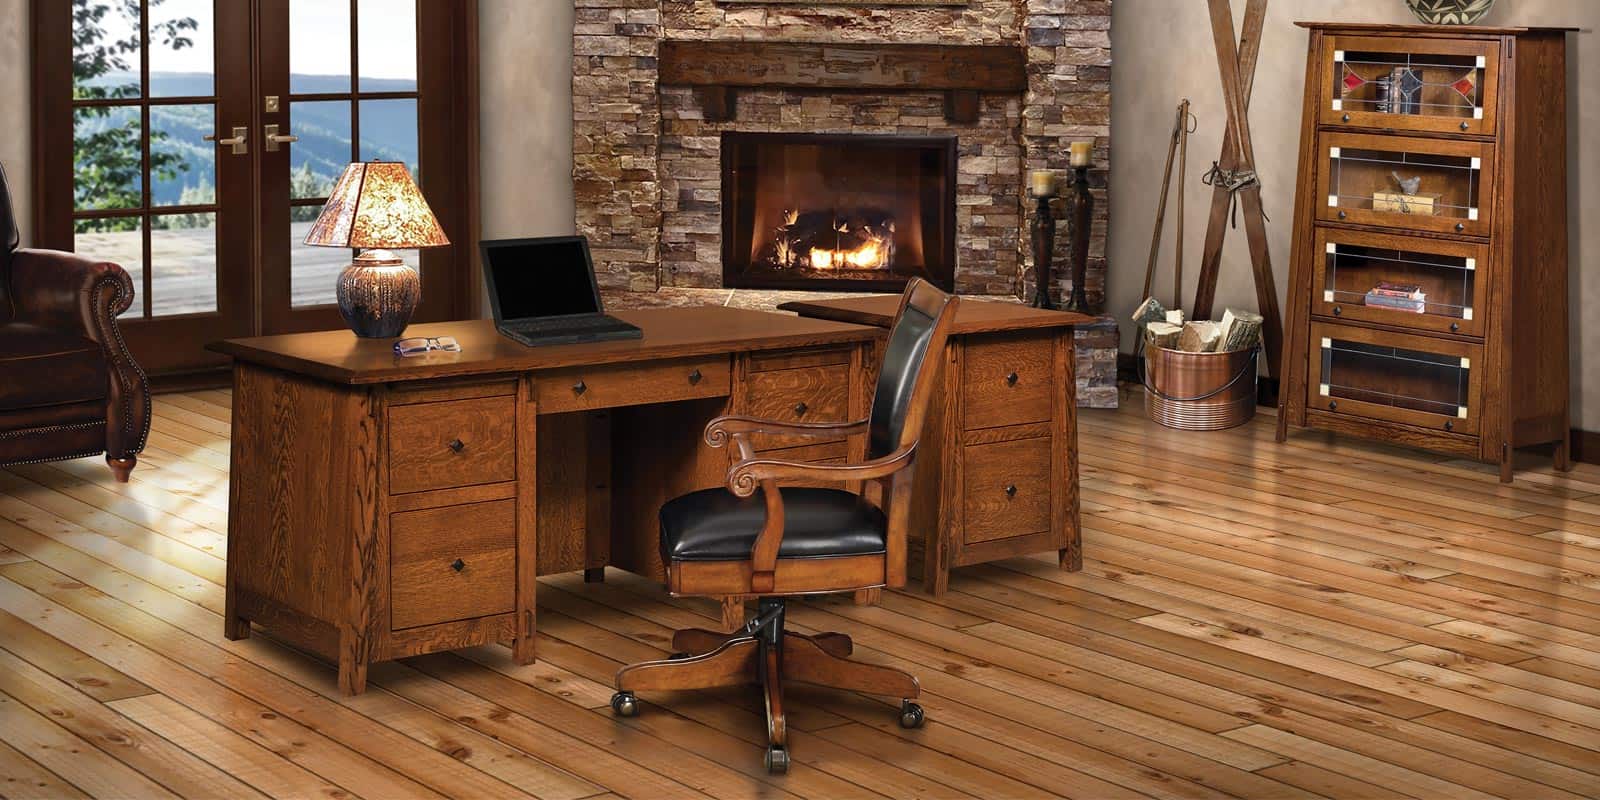 A desk with a lamp and a fireplace